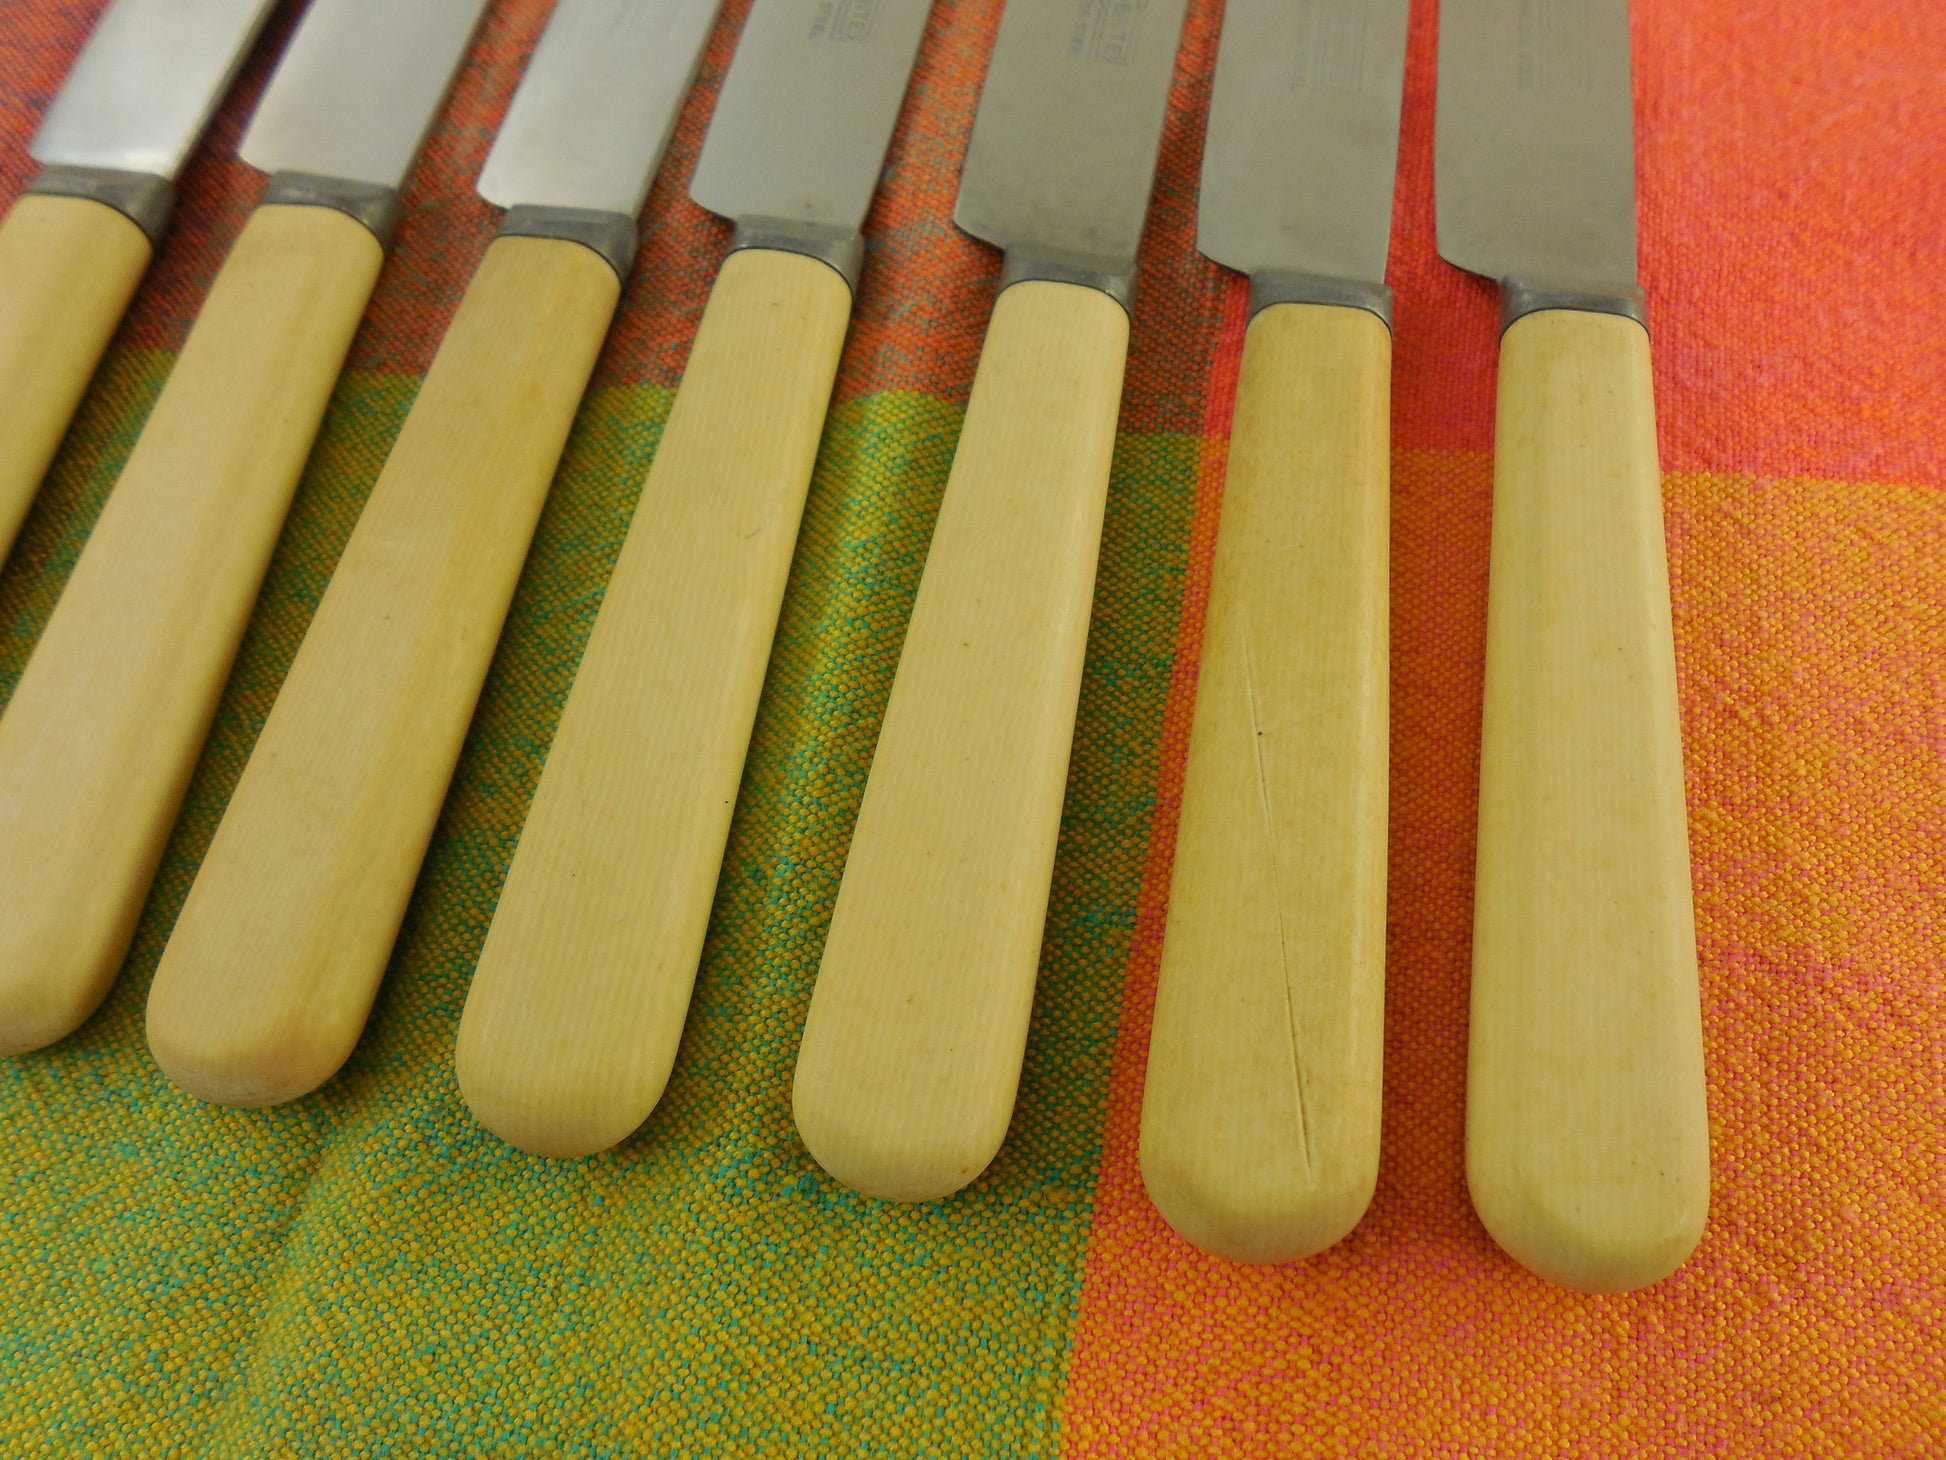 Celluloid Handle Dinner Knives 7 Set - Sta-Brite - Stainless & French Ivory handles